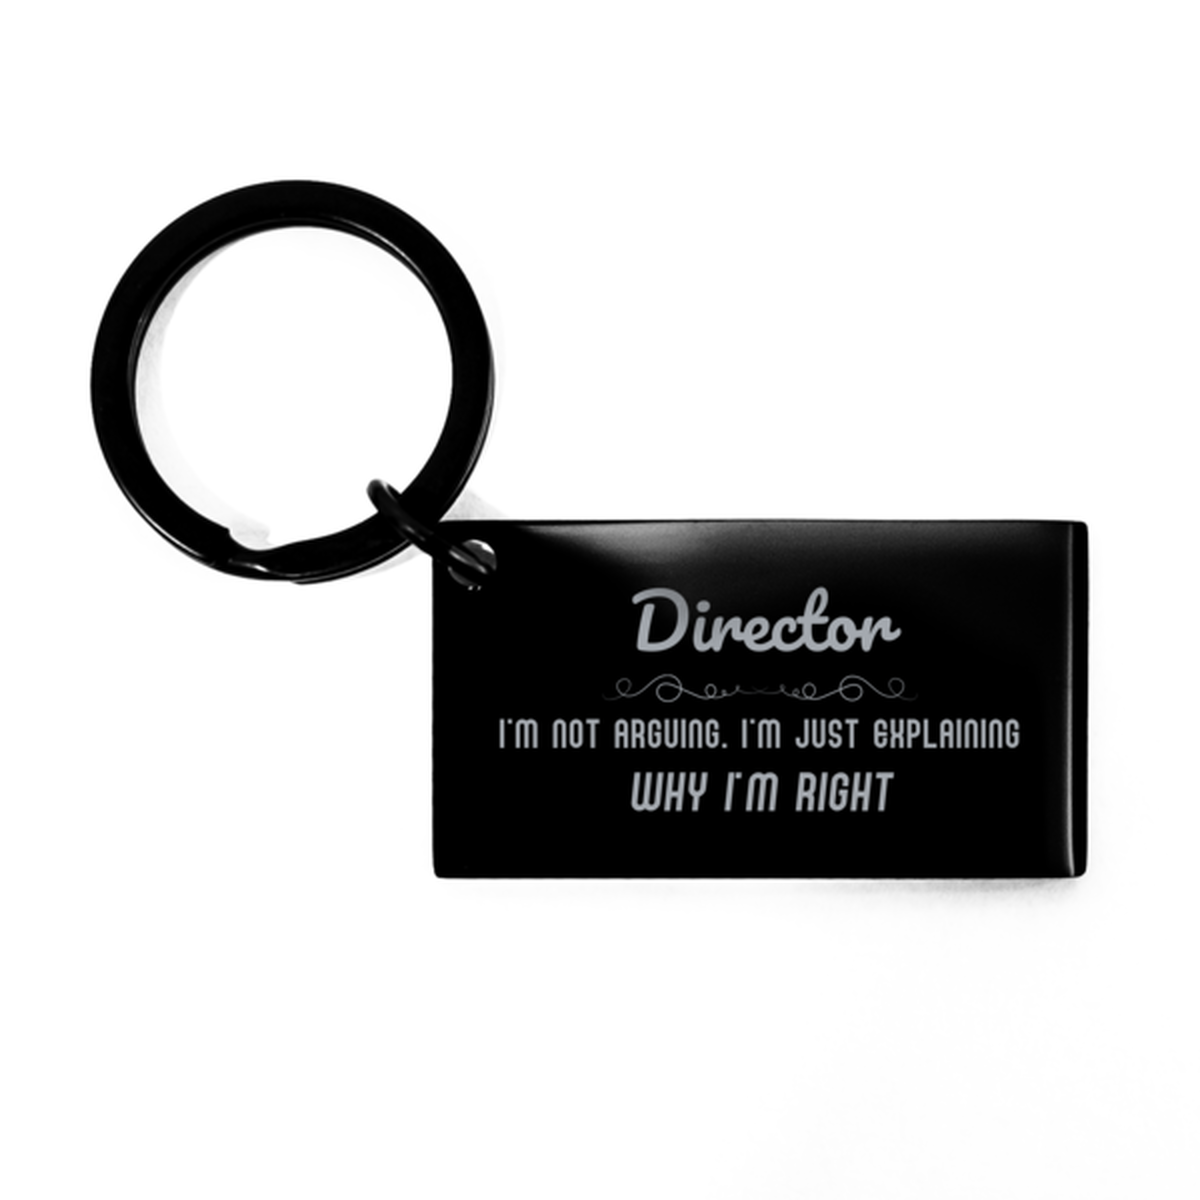 Director I'm not Arguing. I'm Just Explaining Why I'm RIGHT Keychain, Funny Saying Quote Director Gifts For Director Graduation Birthday Christmas Gifts for Men Women Coworker